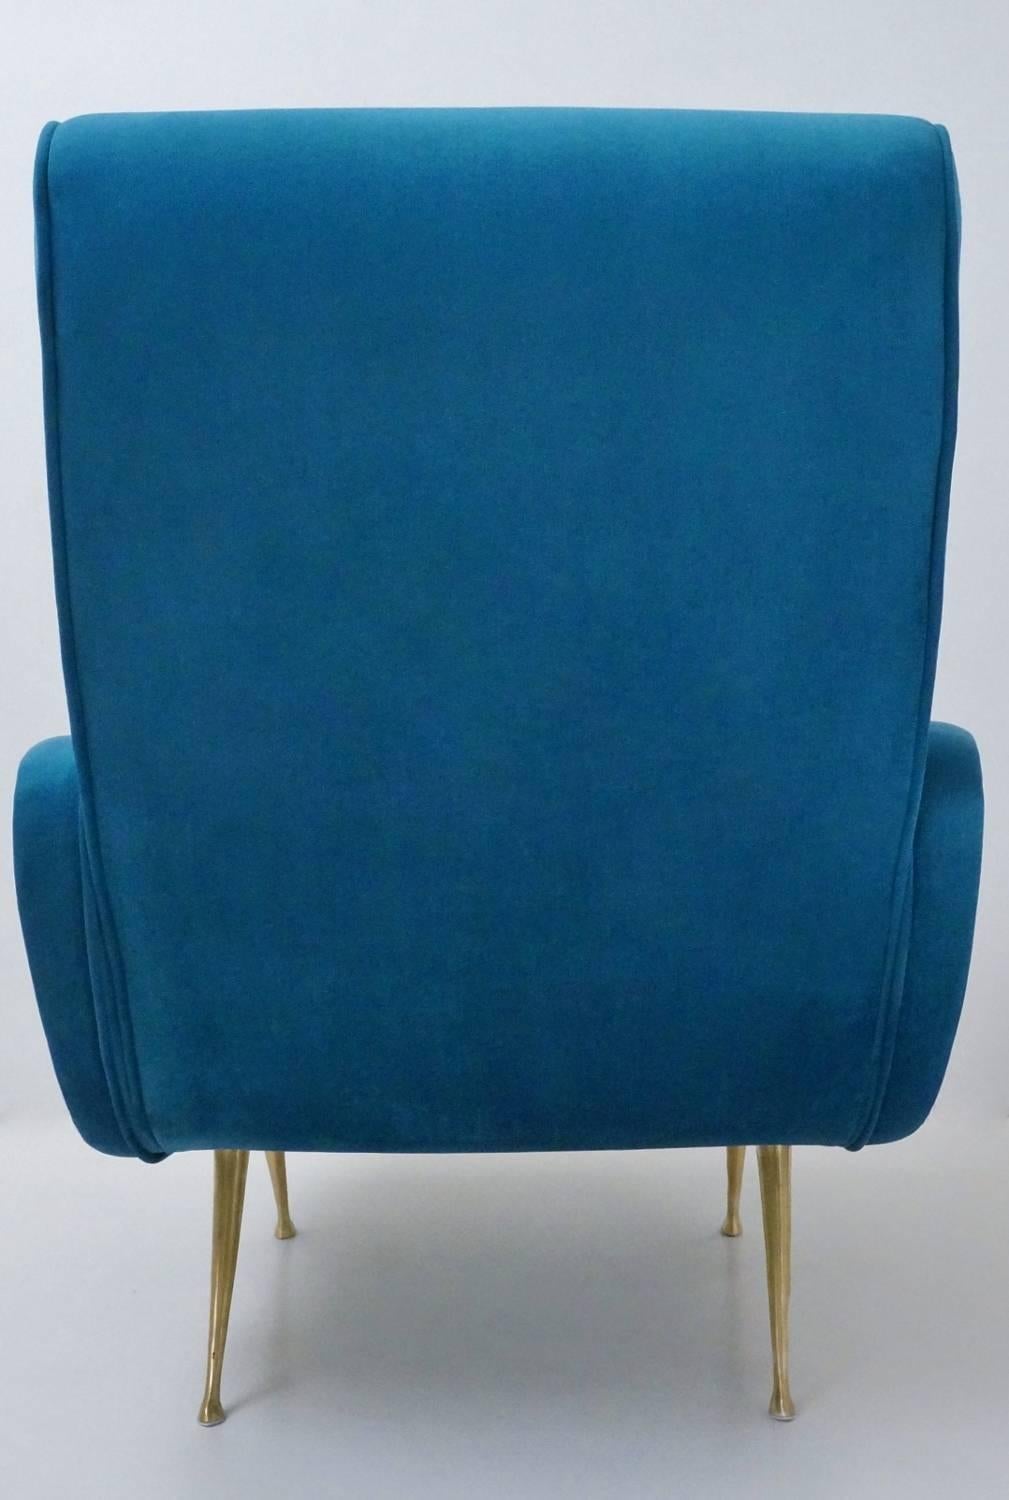 1950s Style Armchair Newly Made to Order in 25 Colors,  Italian For Sale 2